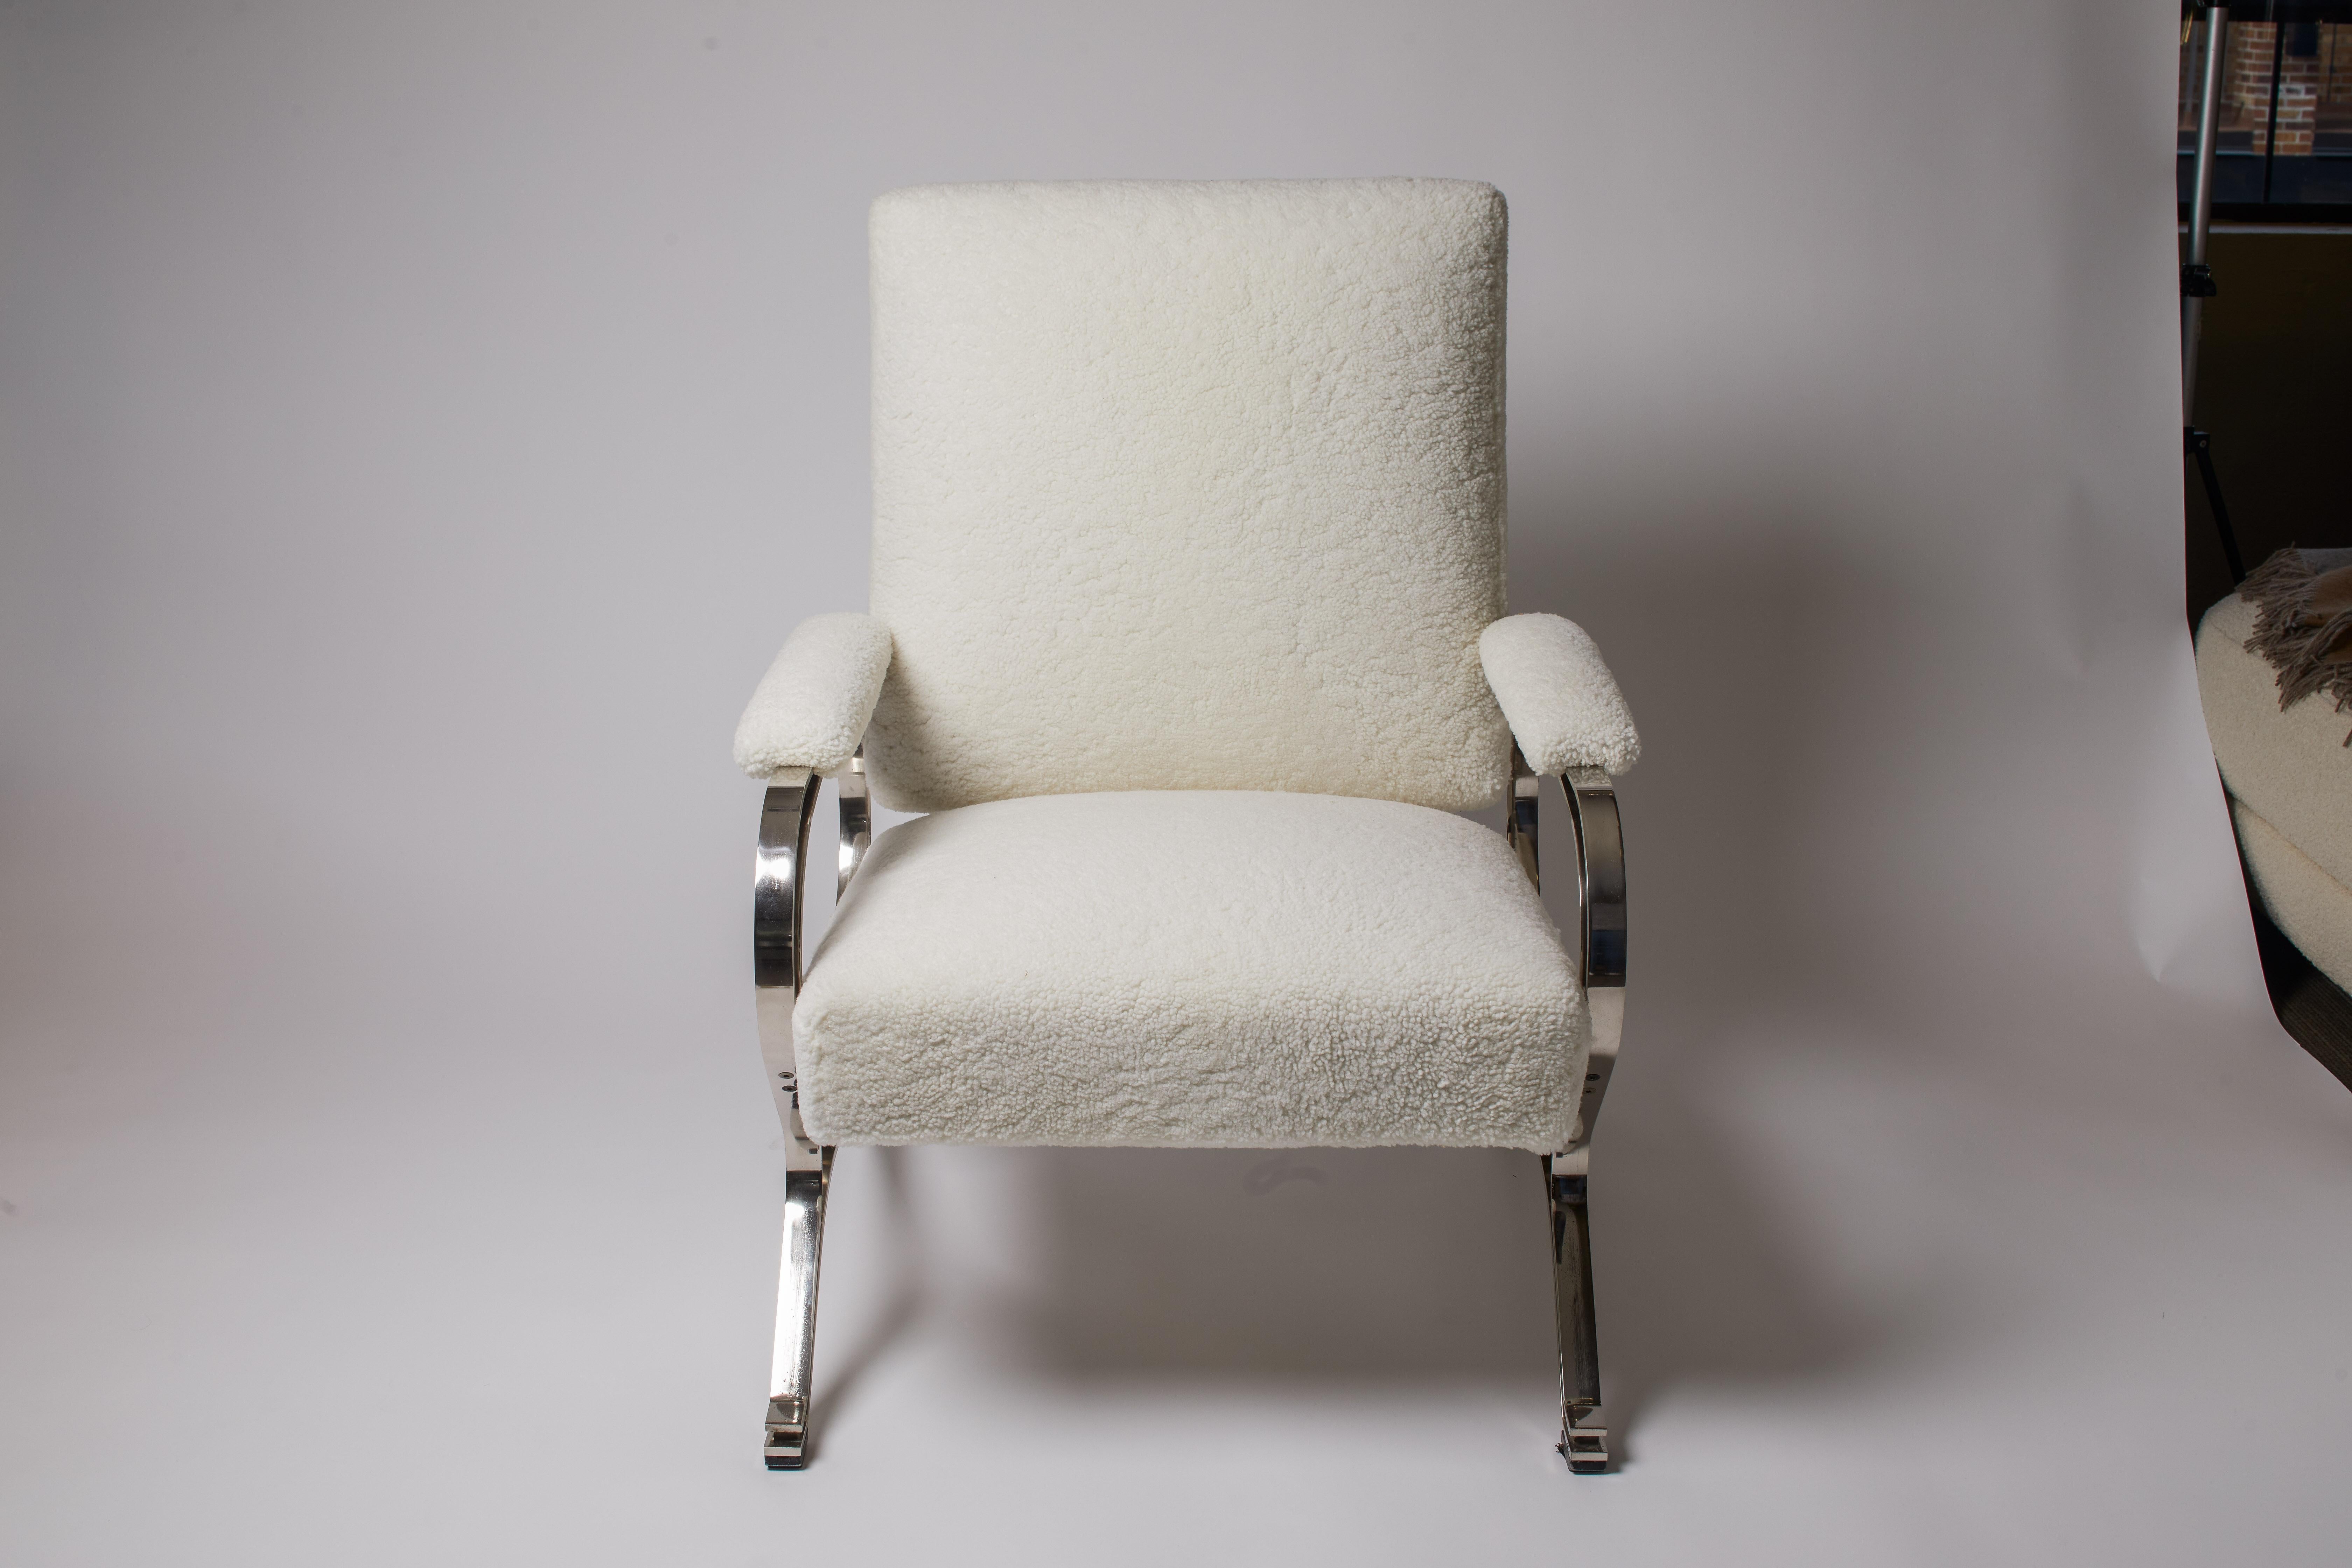 1970s Italian pair of white shearling armchairs with chrome detailing by Gianni Moscatelli.